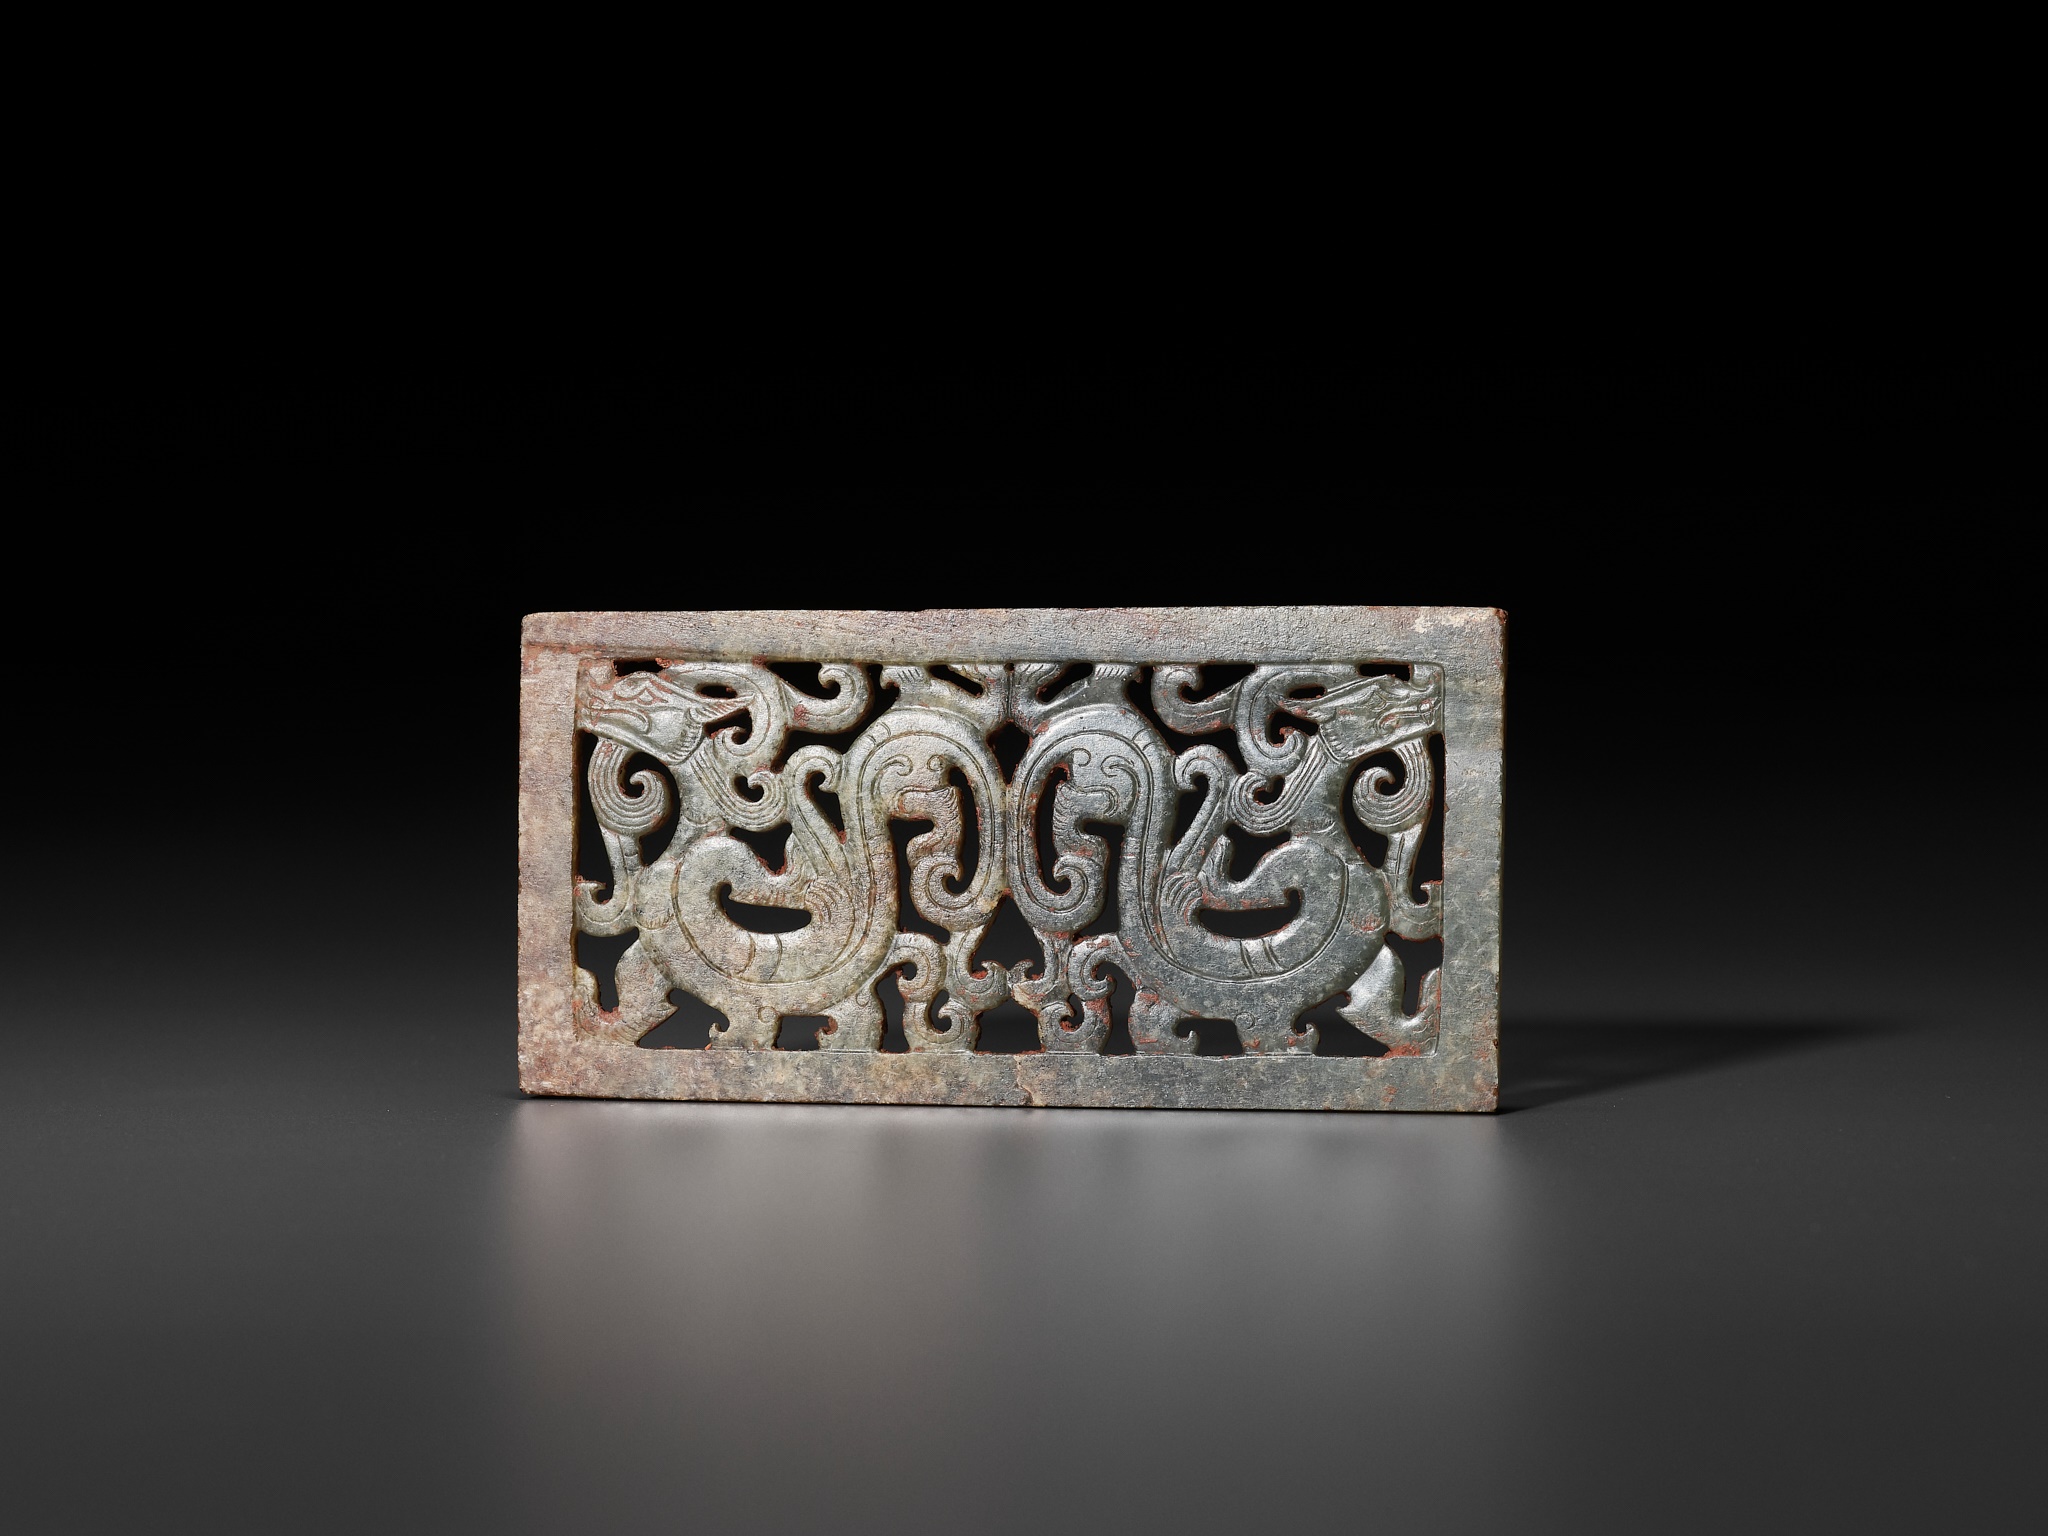 A RECTANGULAR GREEN JADE 'DOUBLE DRAGON' PLAQUE, LATE WARRING STATES PERIOD TO EARLY WESTERN HAN DYN - Image 10 of 12